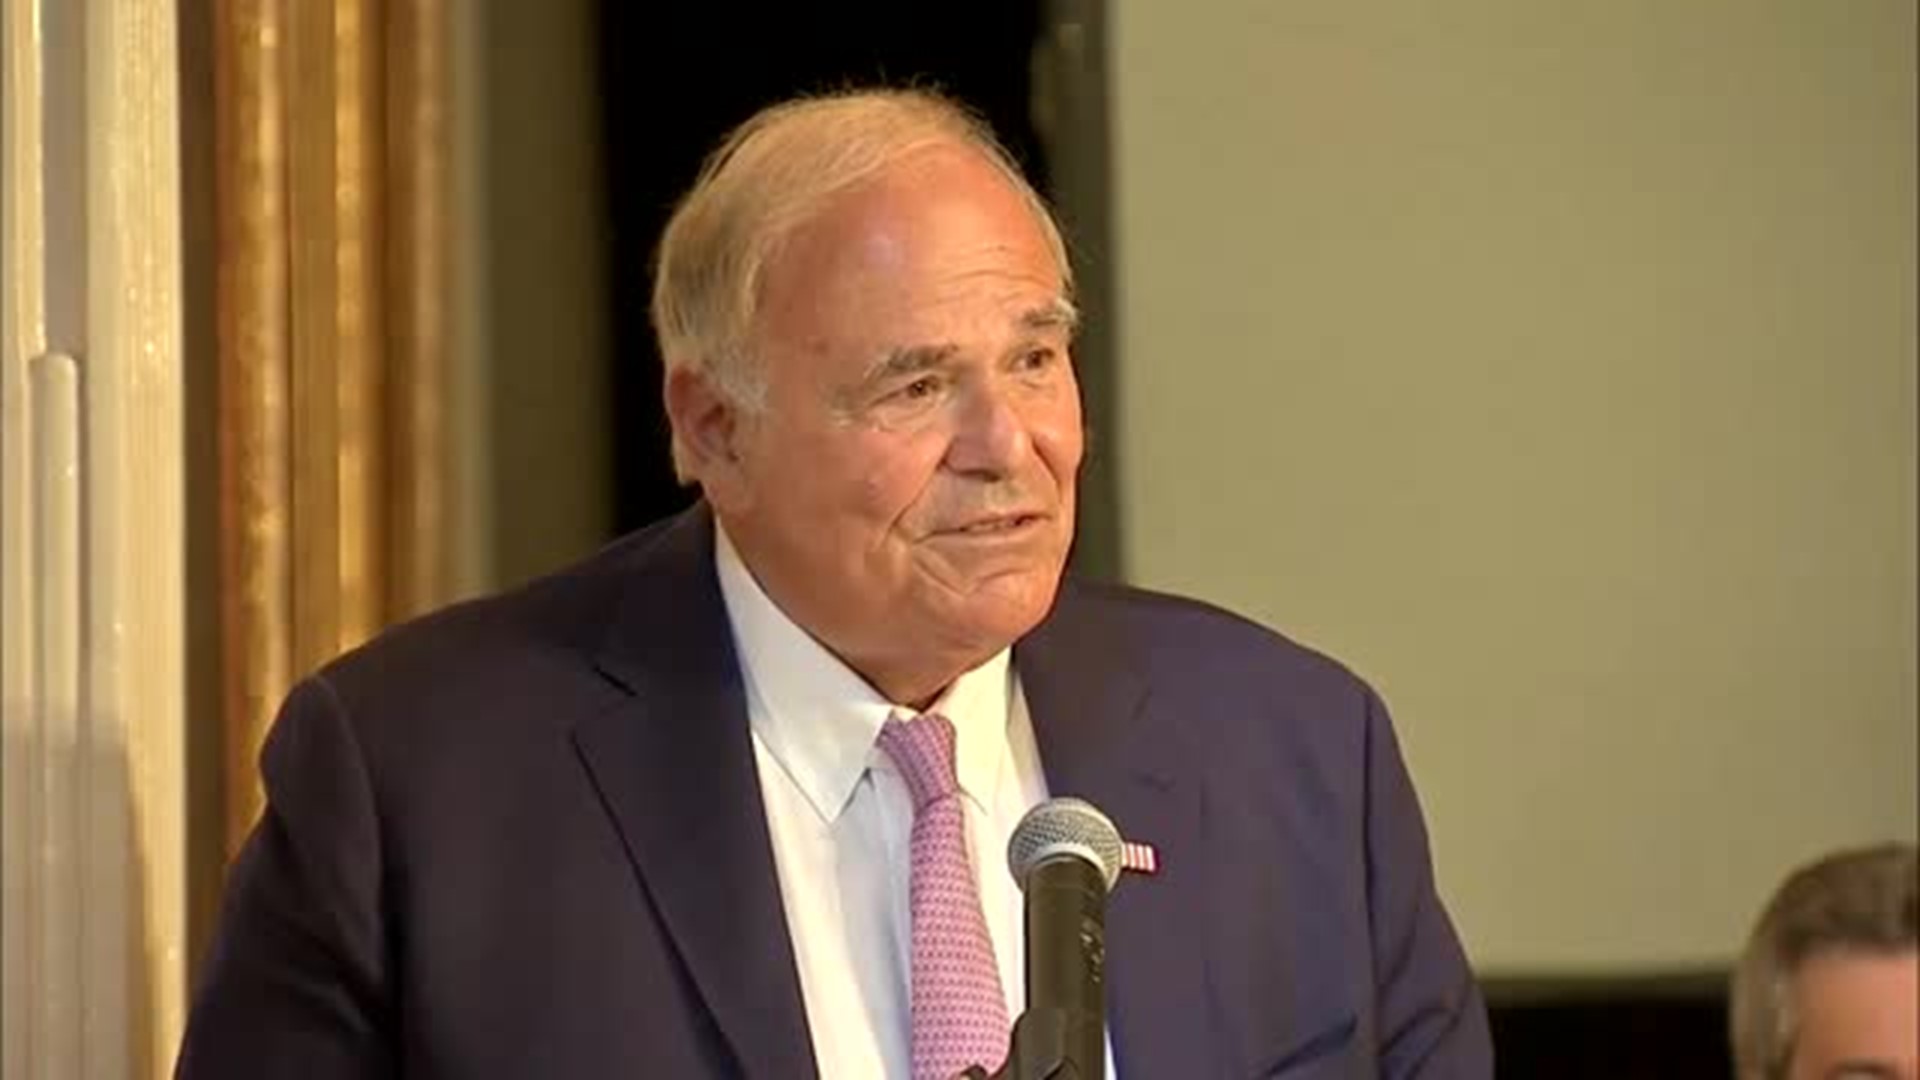 Former PA Governor Ed Rendell Discusses Parkinson's Treatment